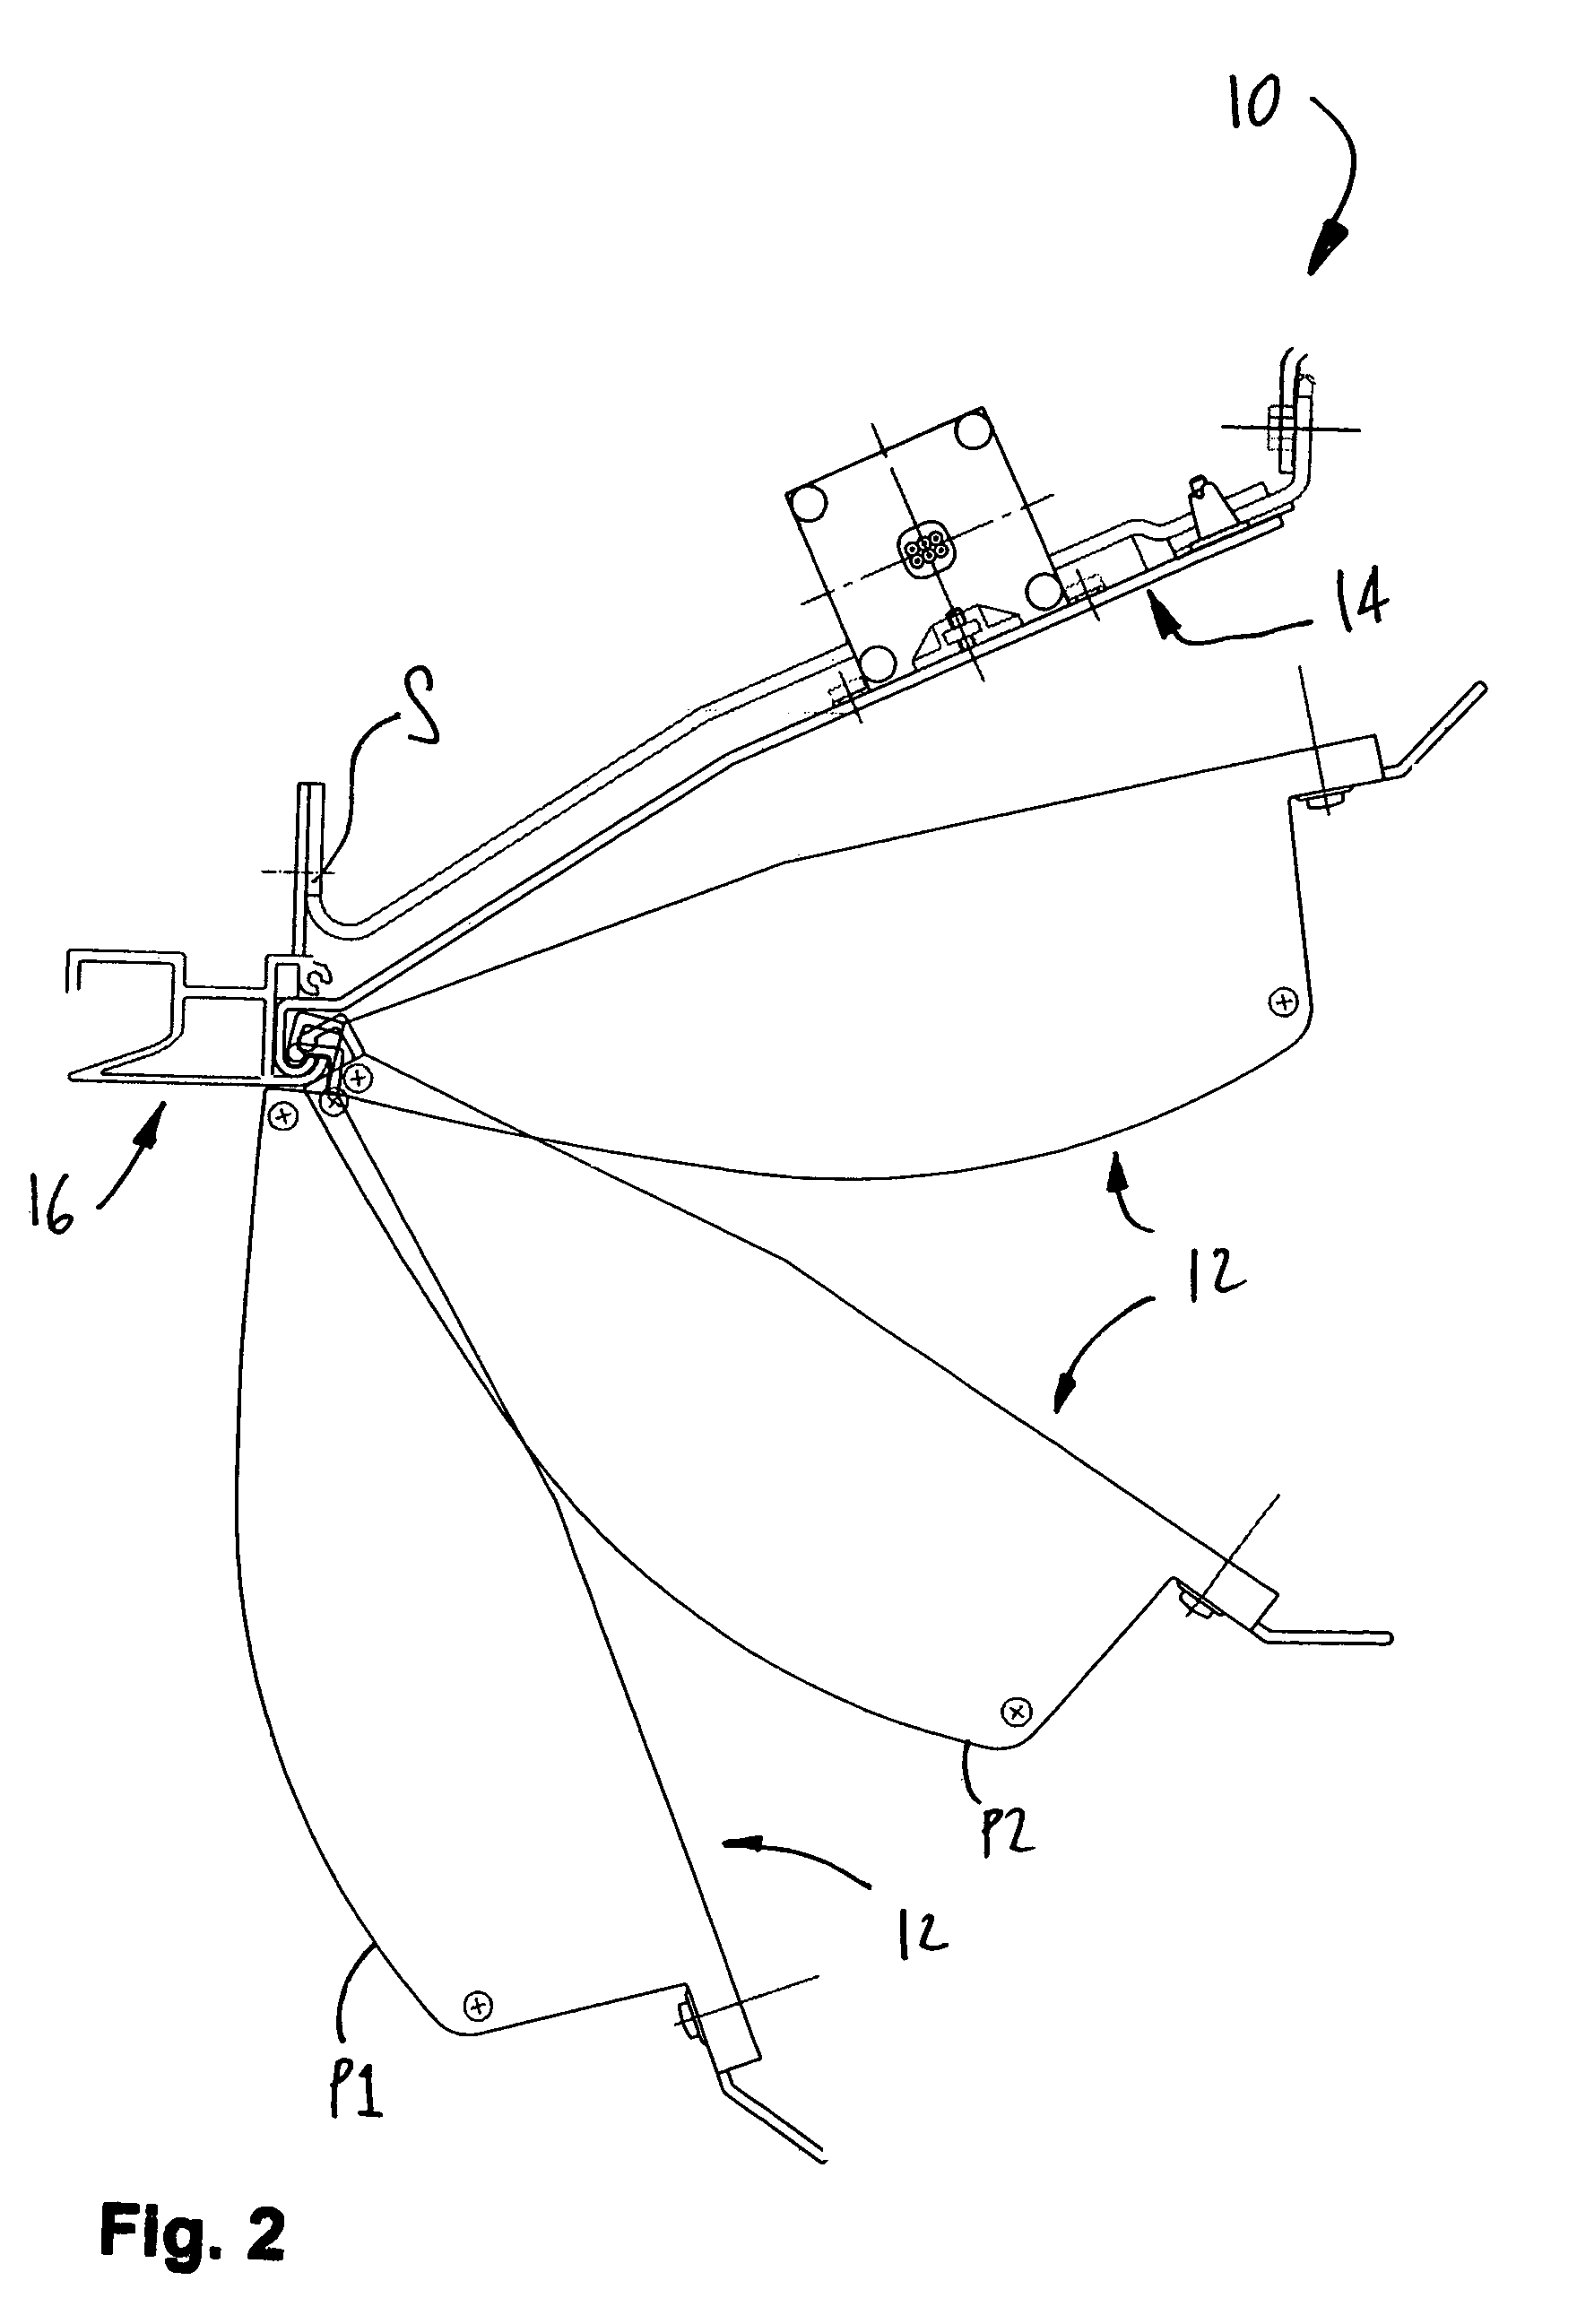 Luminaire assembly and method